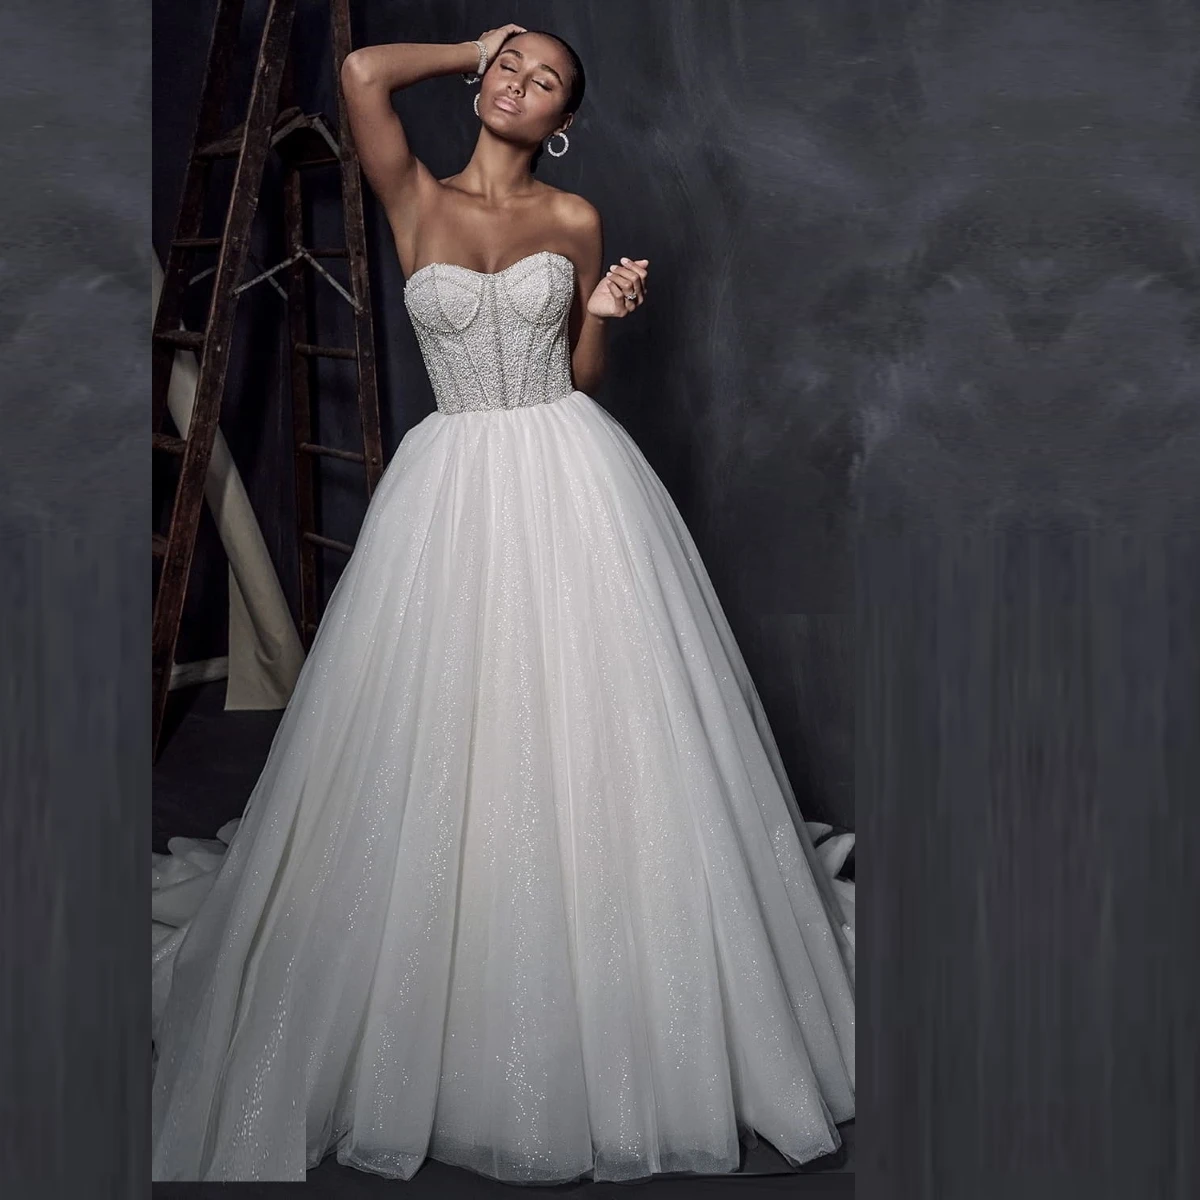 

Bridal Strapless Sweetheart Neckline Heavily Embellished Corset Bodice A Line Ball Gown Wedding Dress